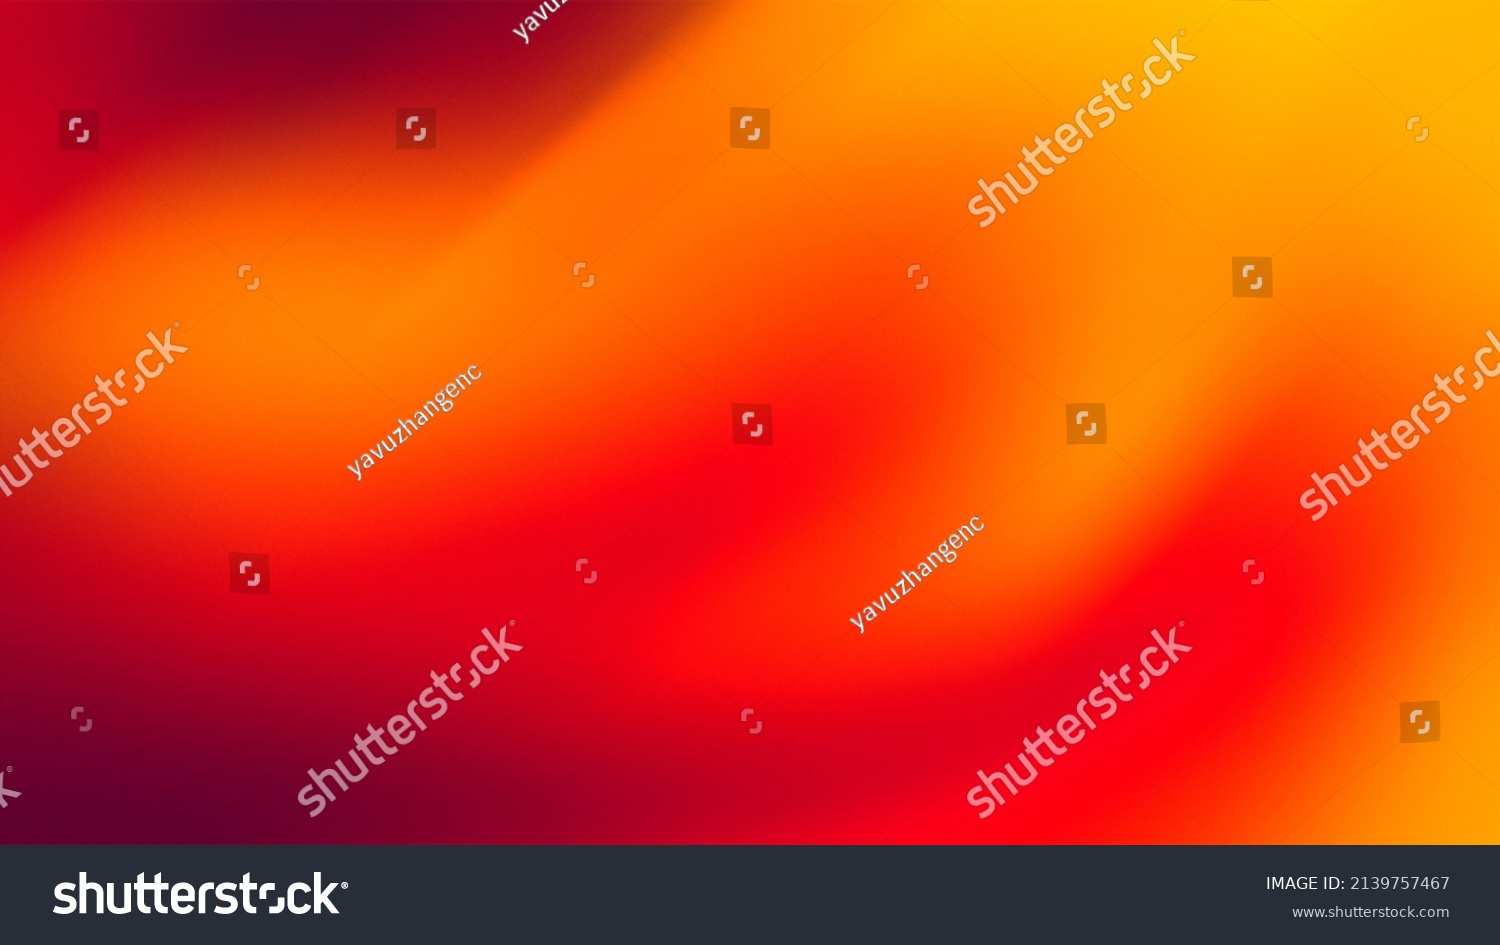 ABSTRACT COLORFULL WALLPAPER BACKGROUND BLUR DYNAMIC DIGITAL BRIGHT MODERN TEMPLATE #2139757467